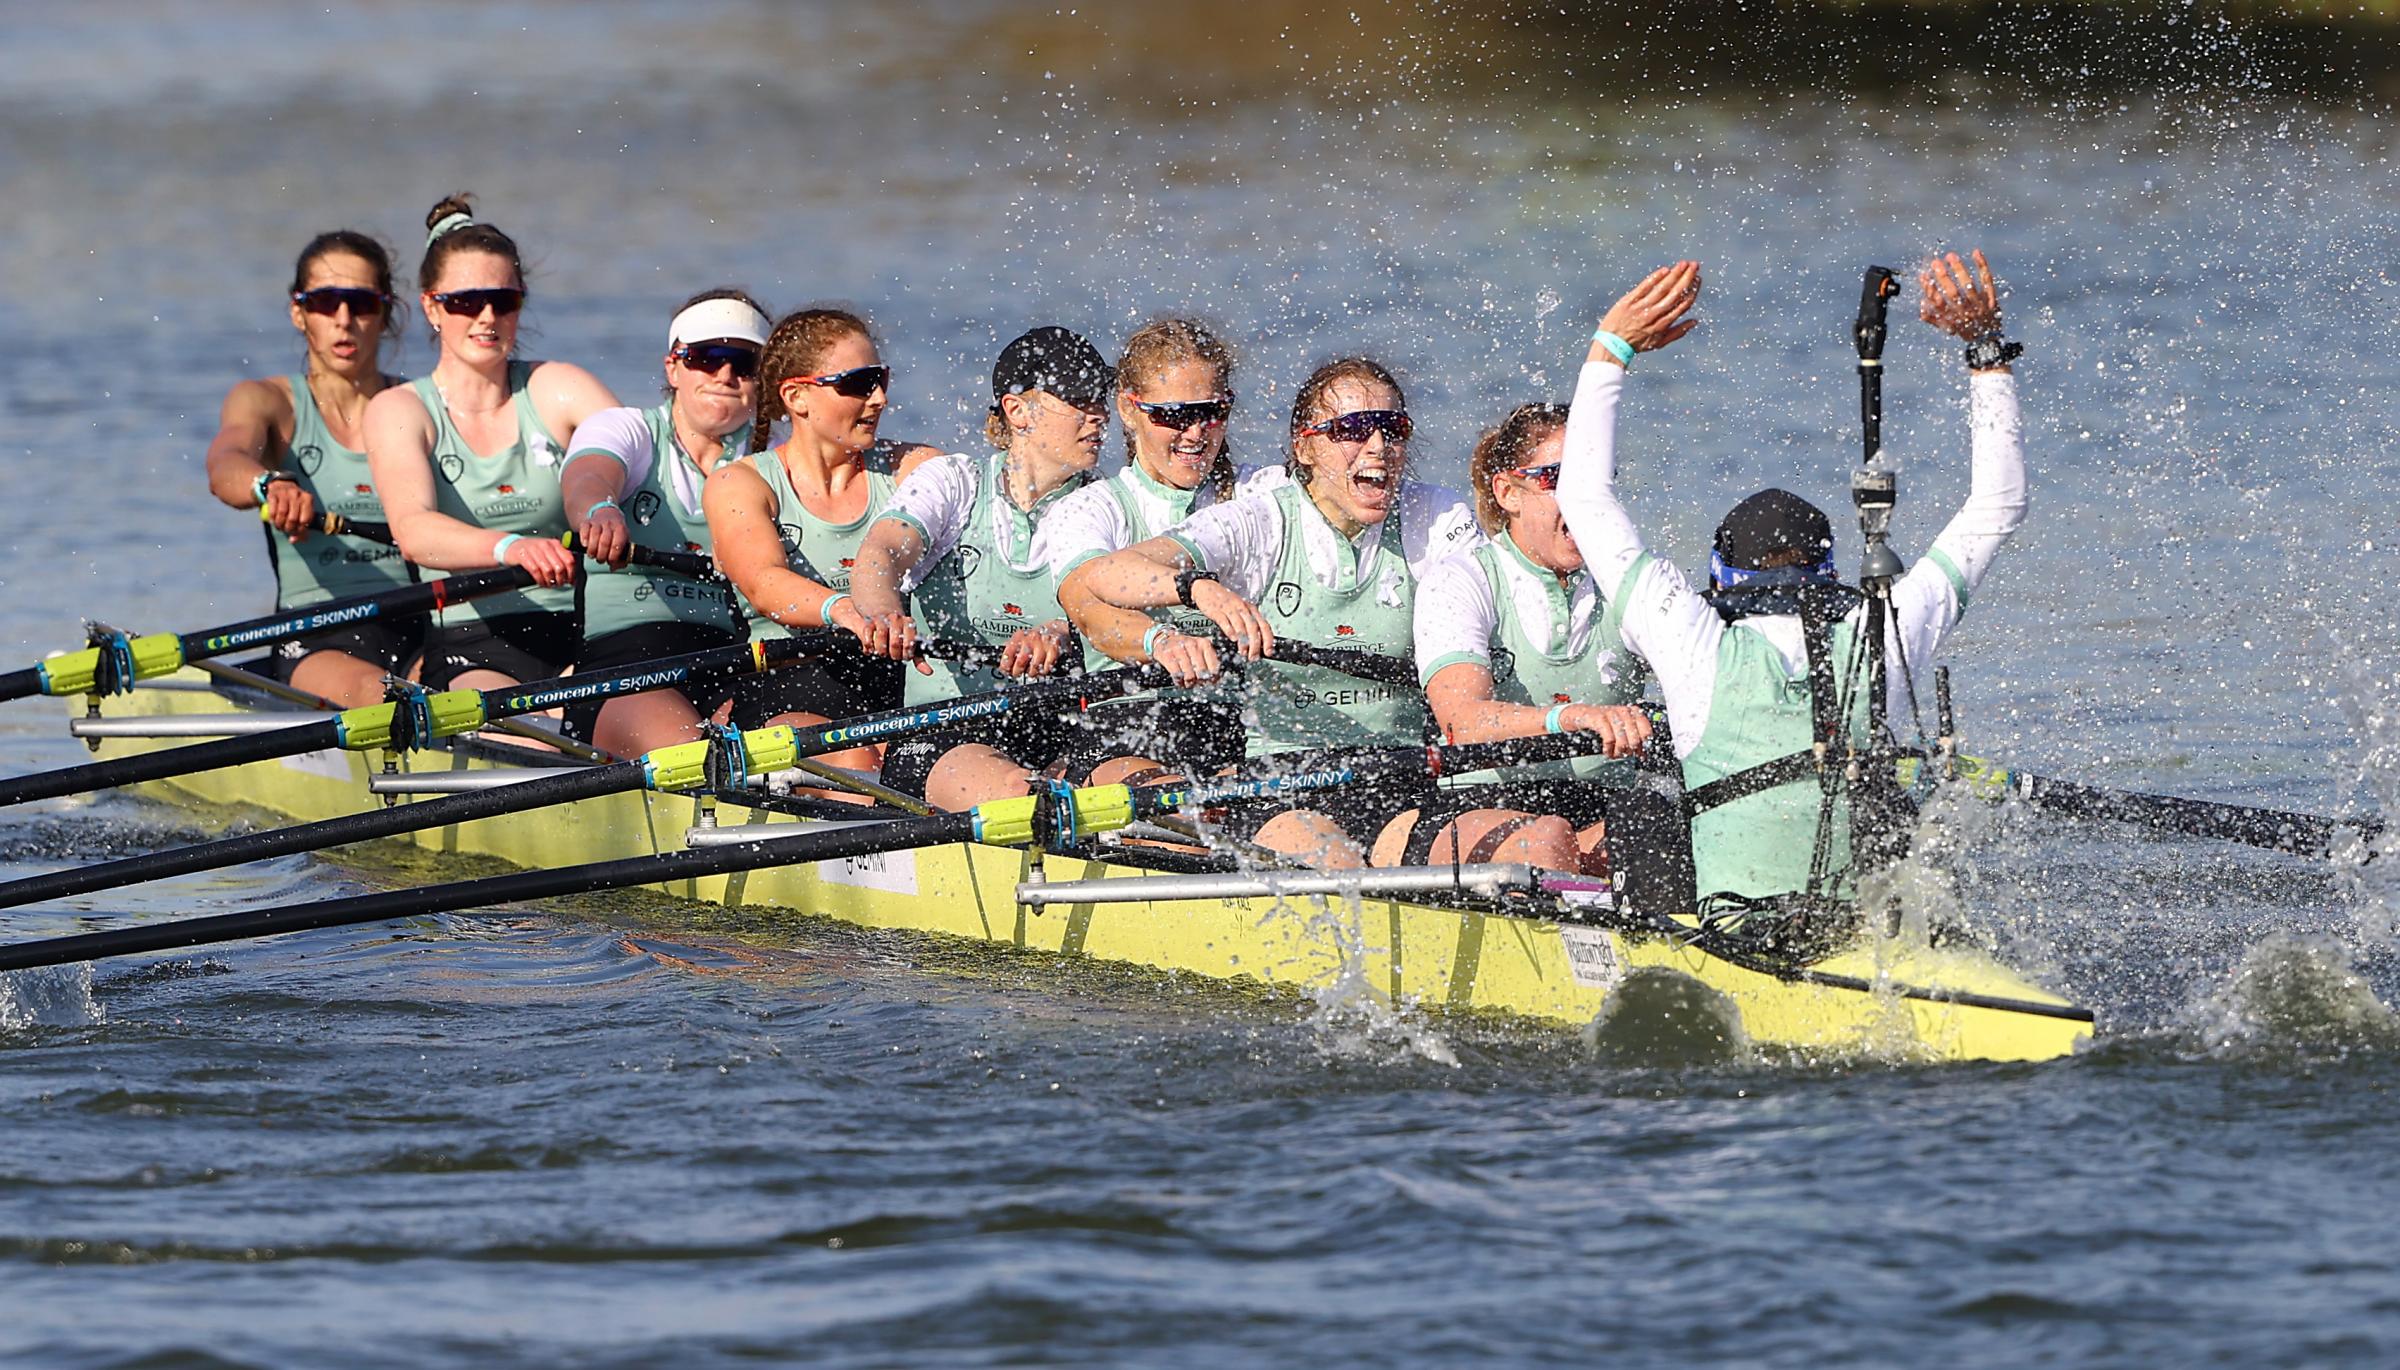 Cambridge celebrate winning the 75th Womens Boat Race on the River Great Ouse near Ely in Cambridgeshire